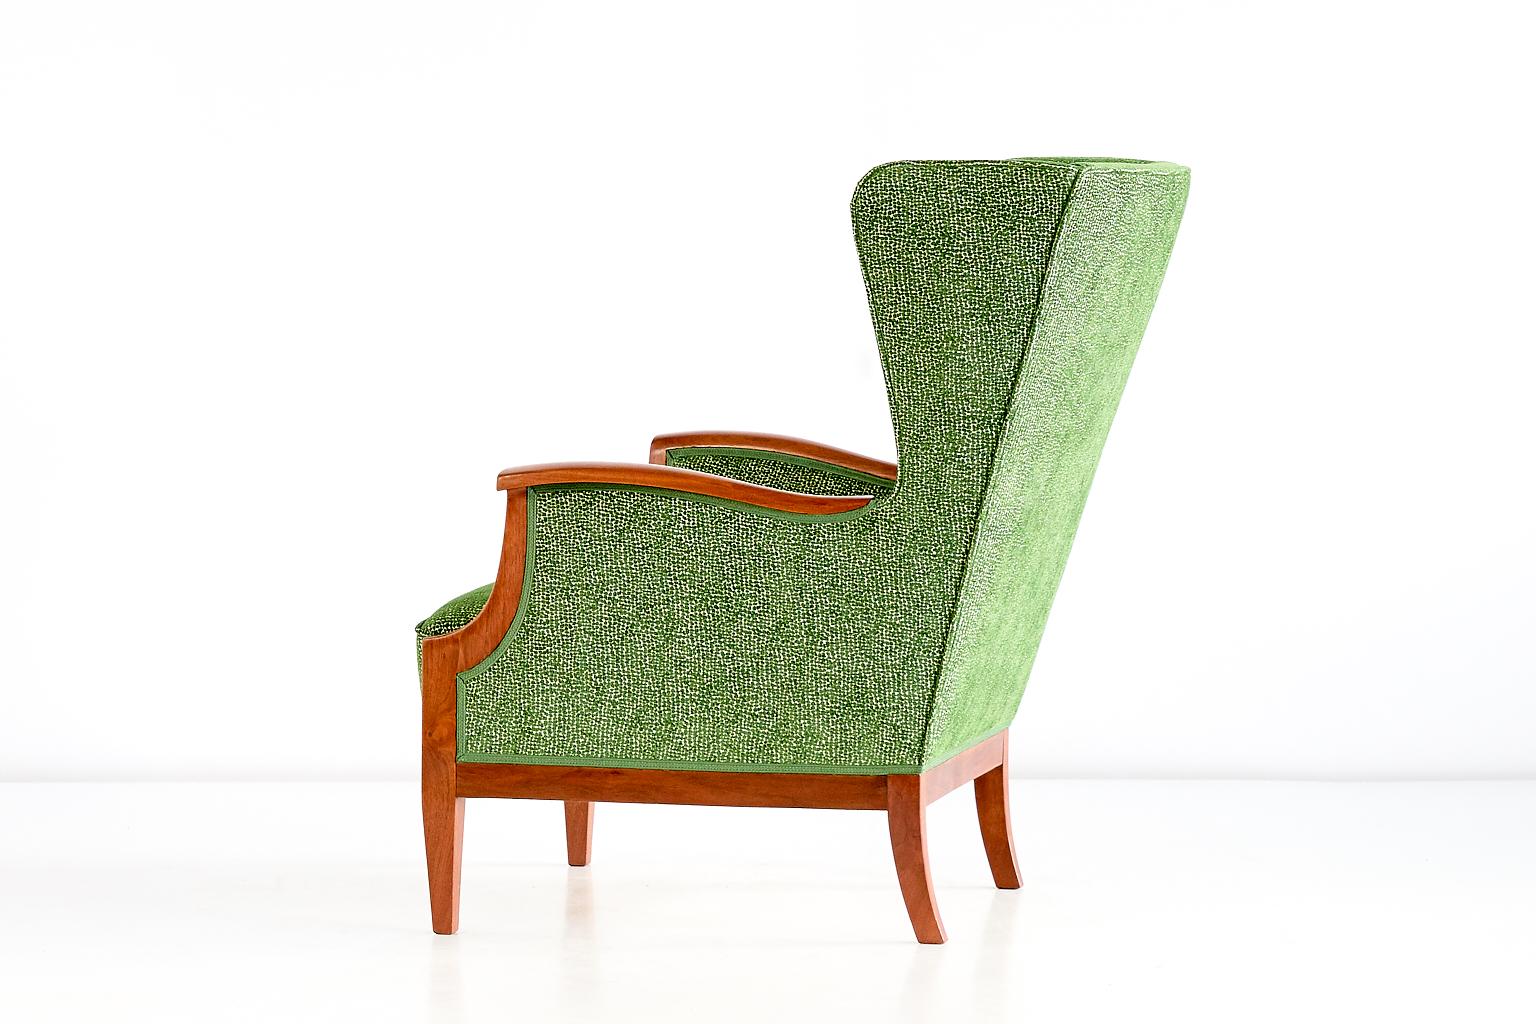 Frits Henningsen Wingback Chair in Walnut and Green Rubelli Fabric, 1930s For Sale 1